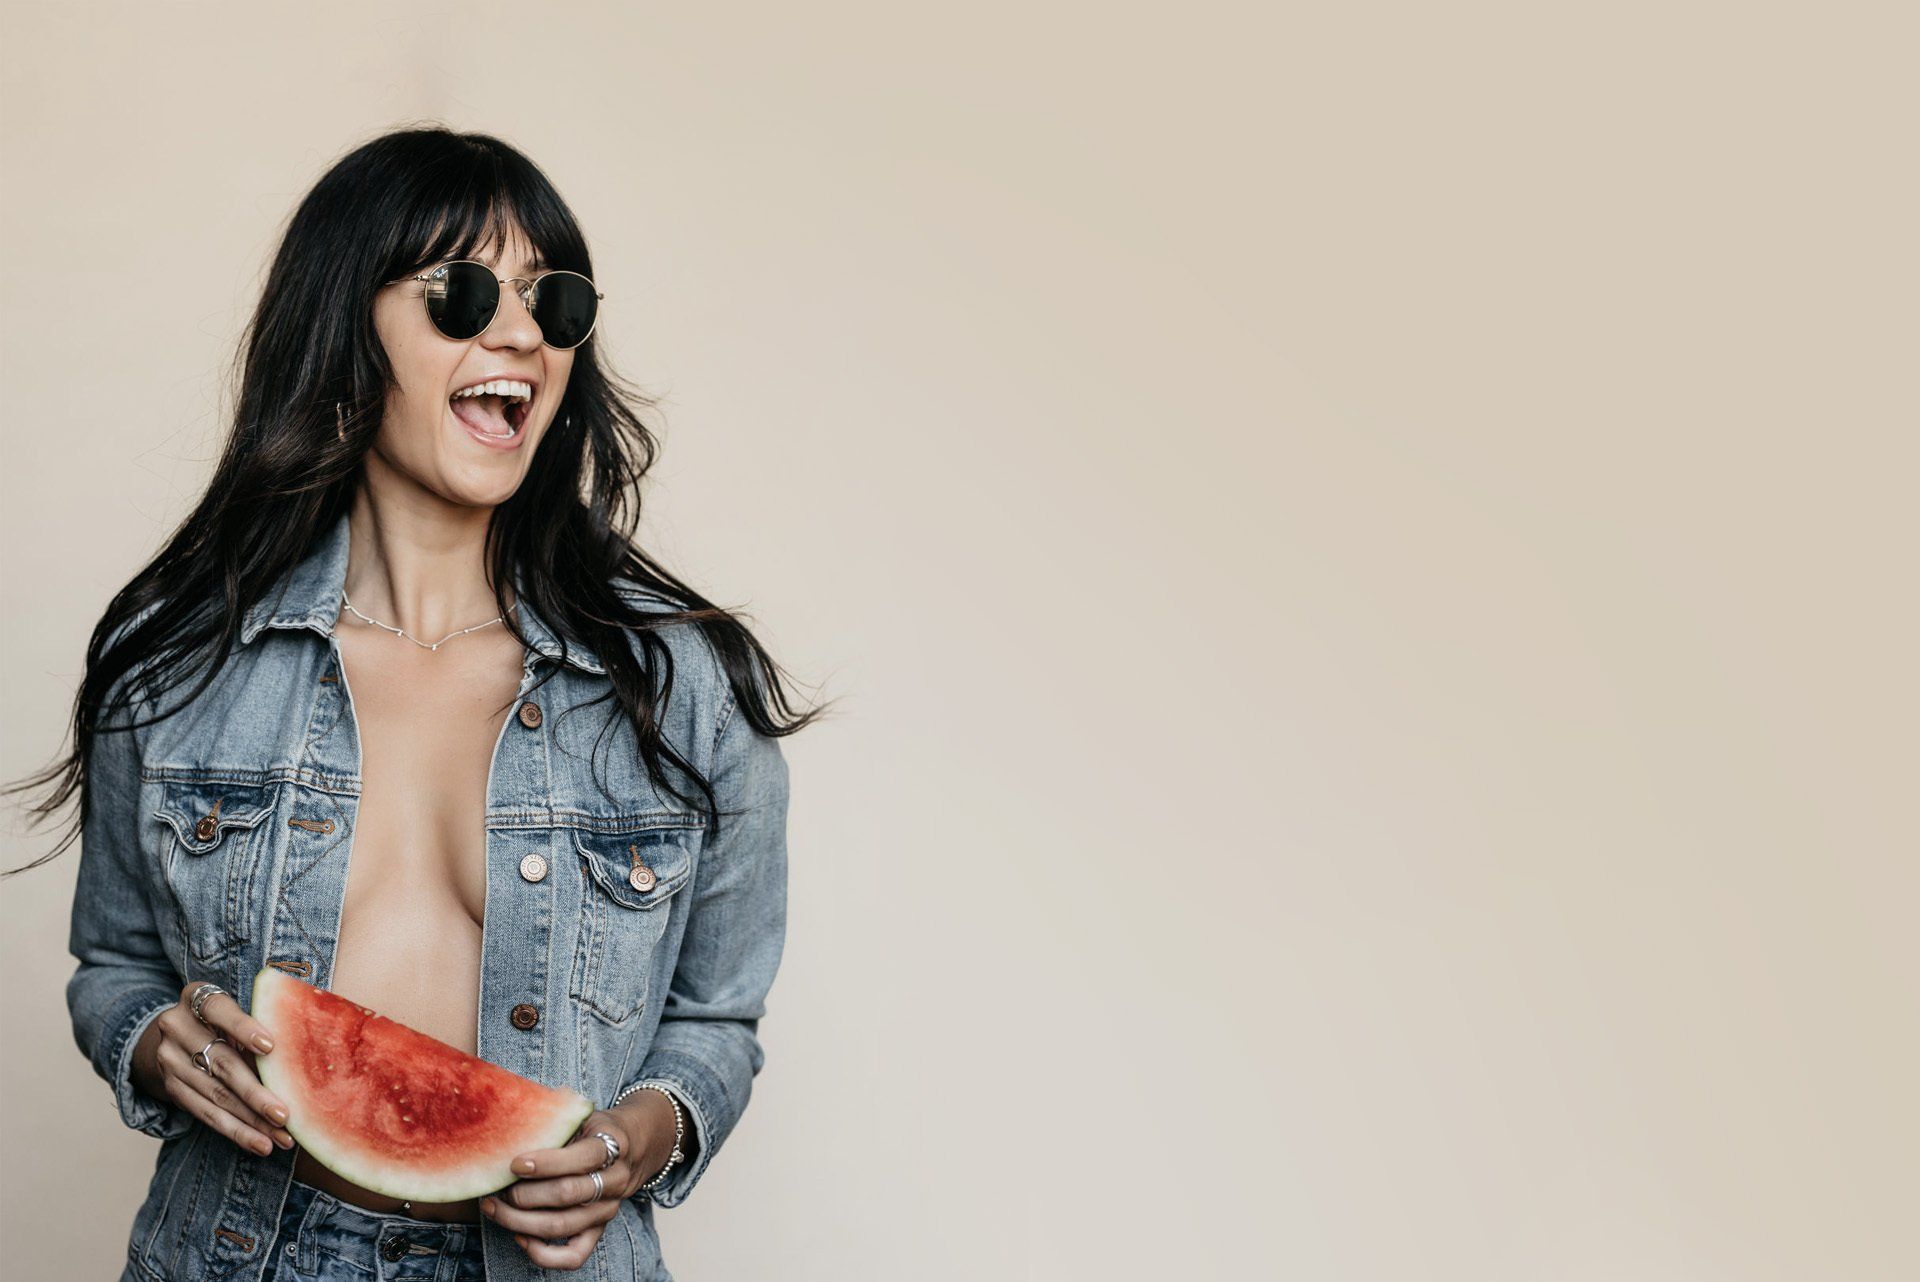 A beautiful young woman smiles while wearing dark sun glasses and holds a slice of watermelon